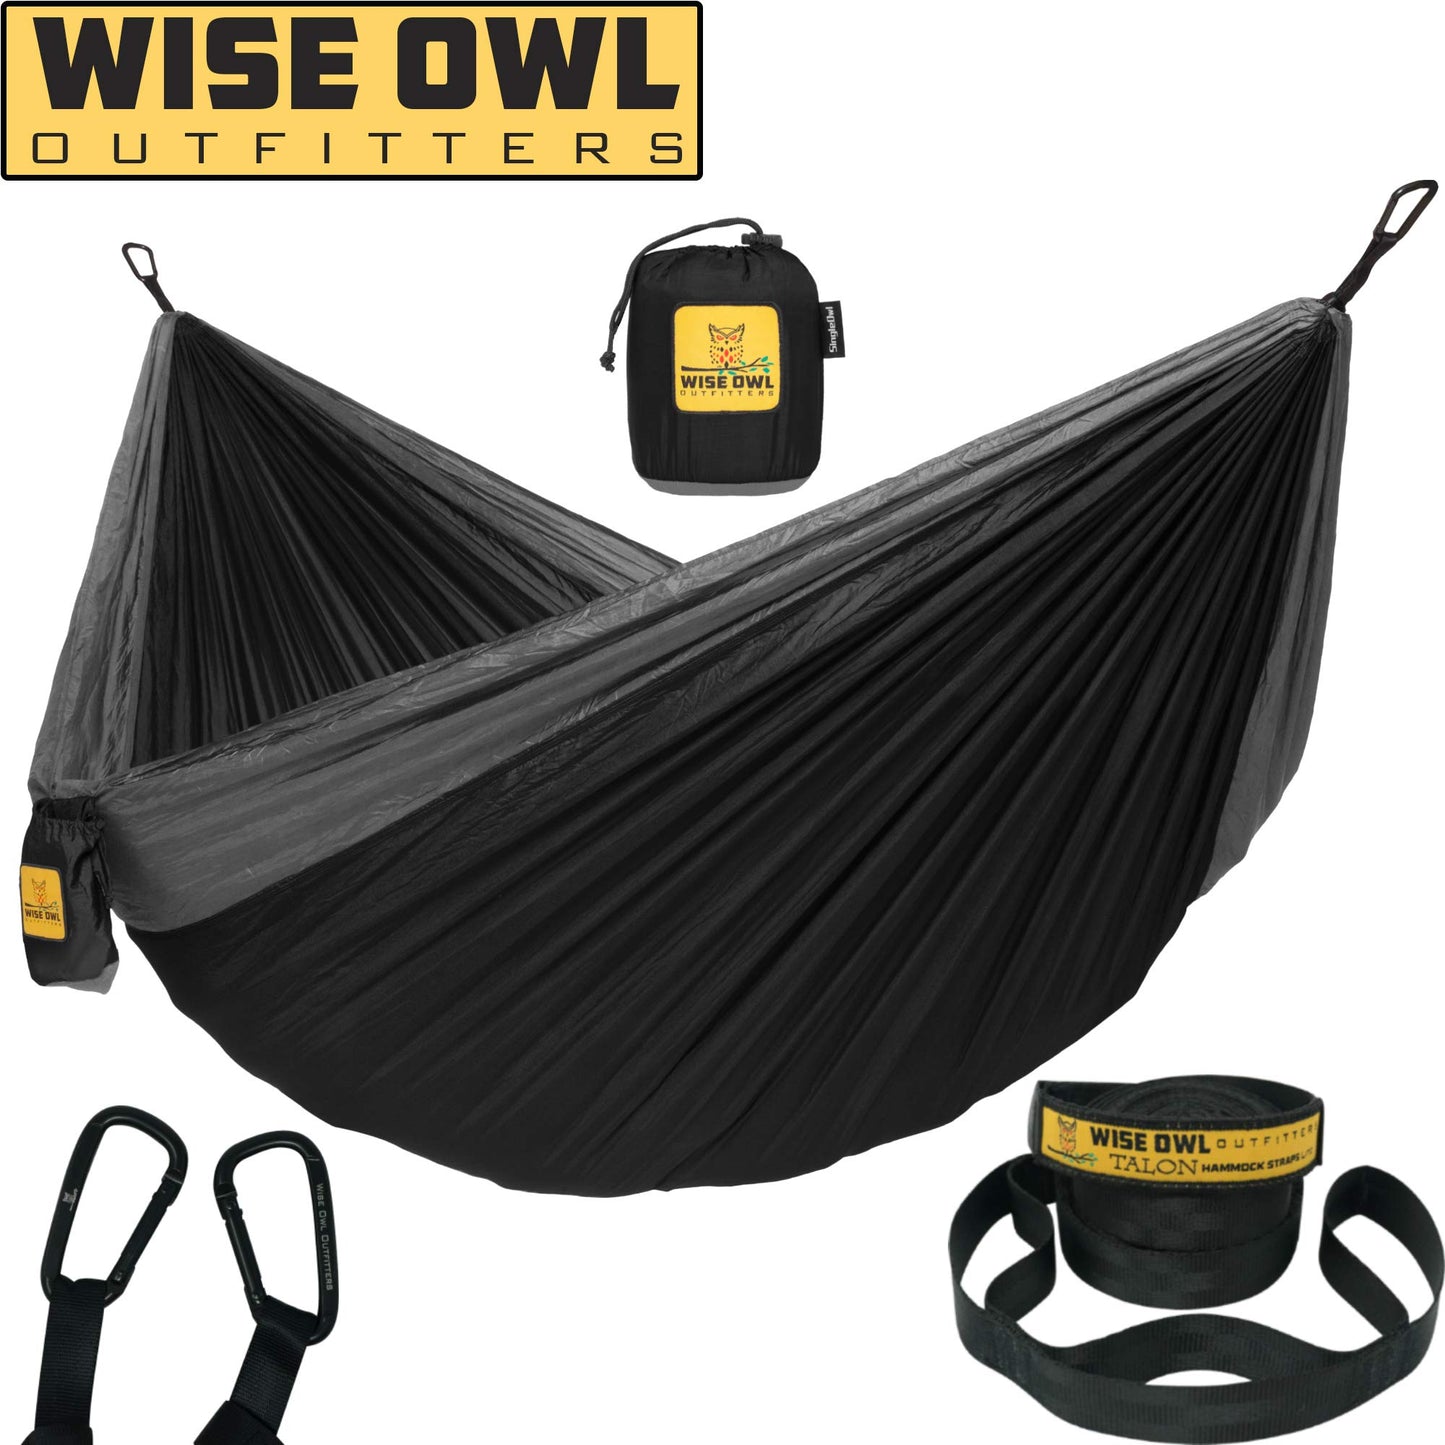 Black Hammock for Camping - Wise Owl Outfitters